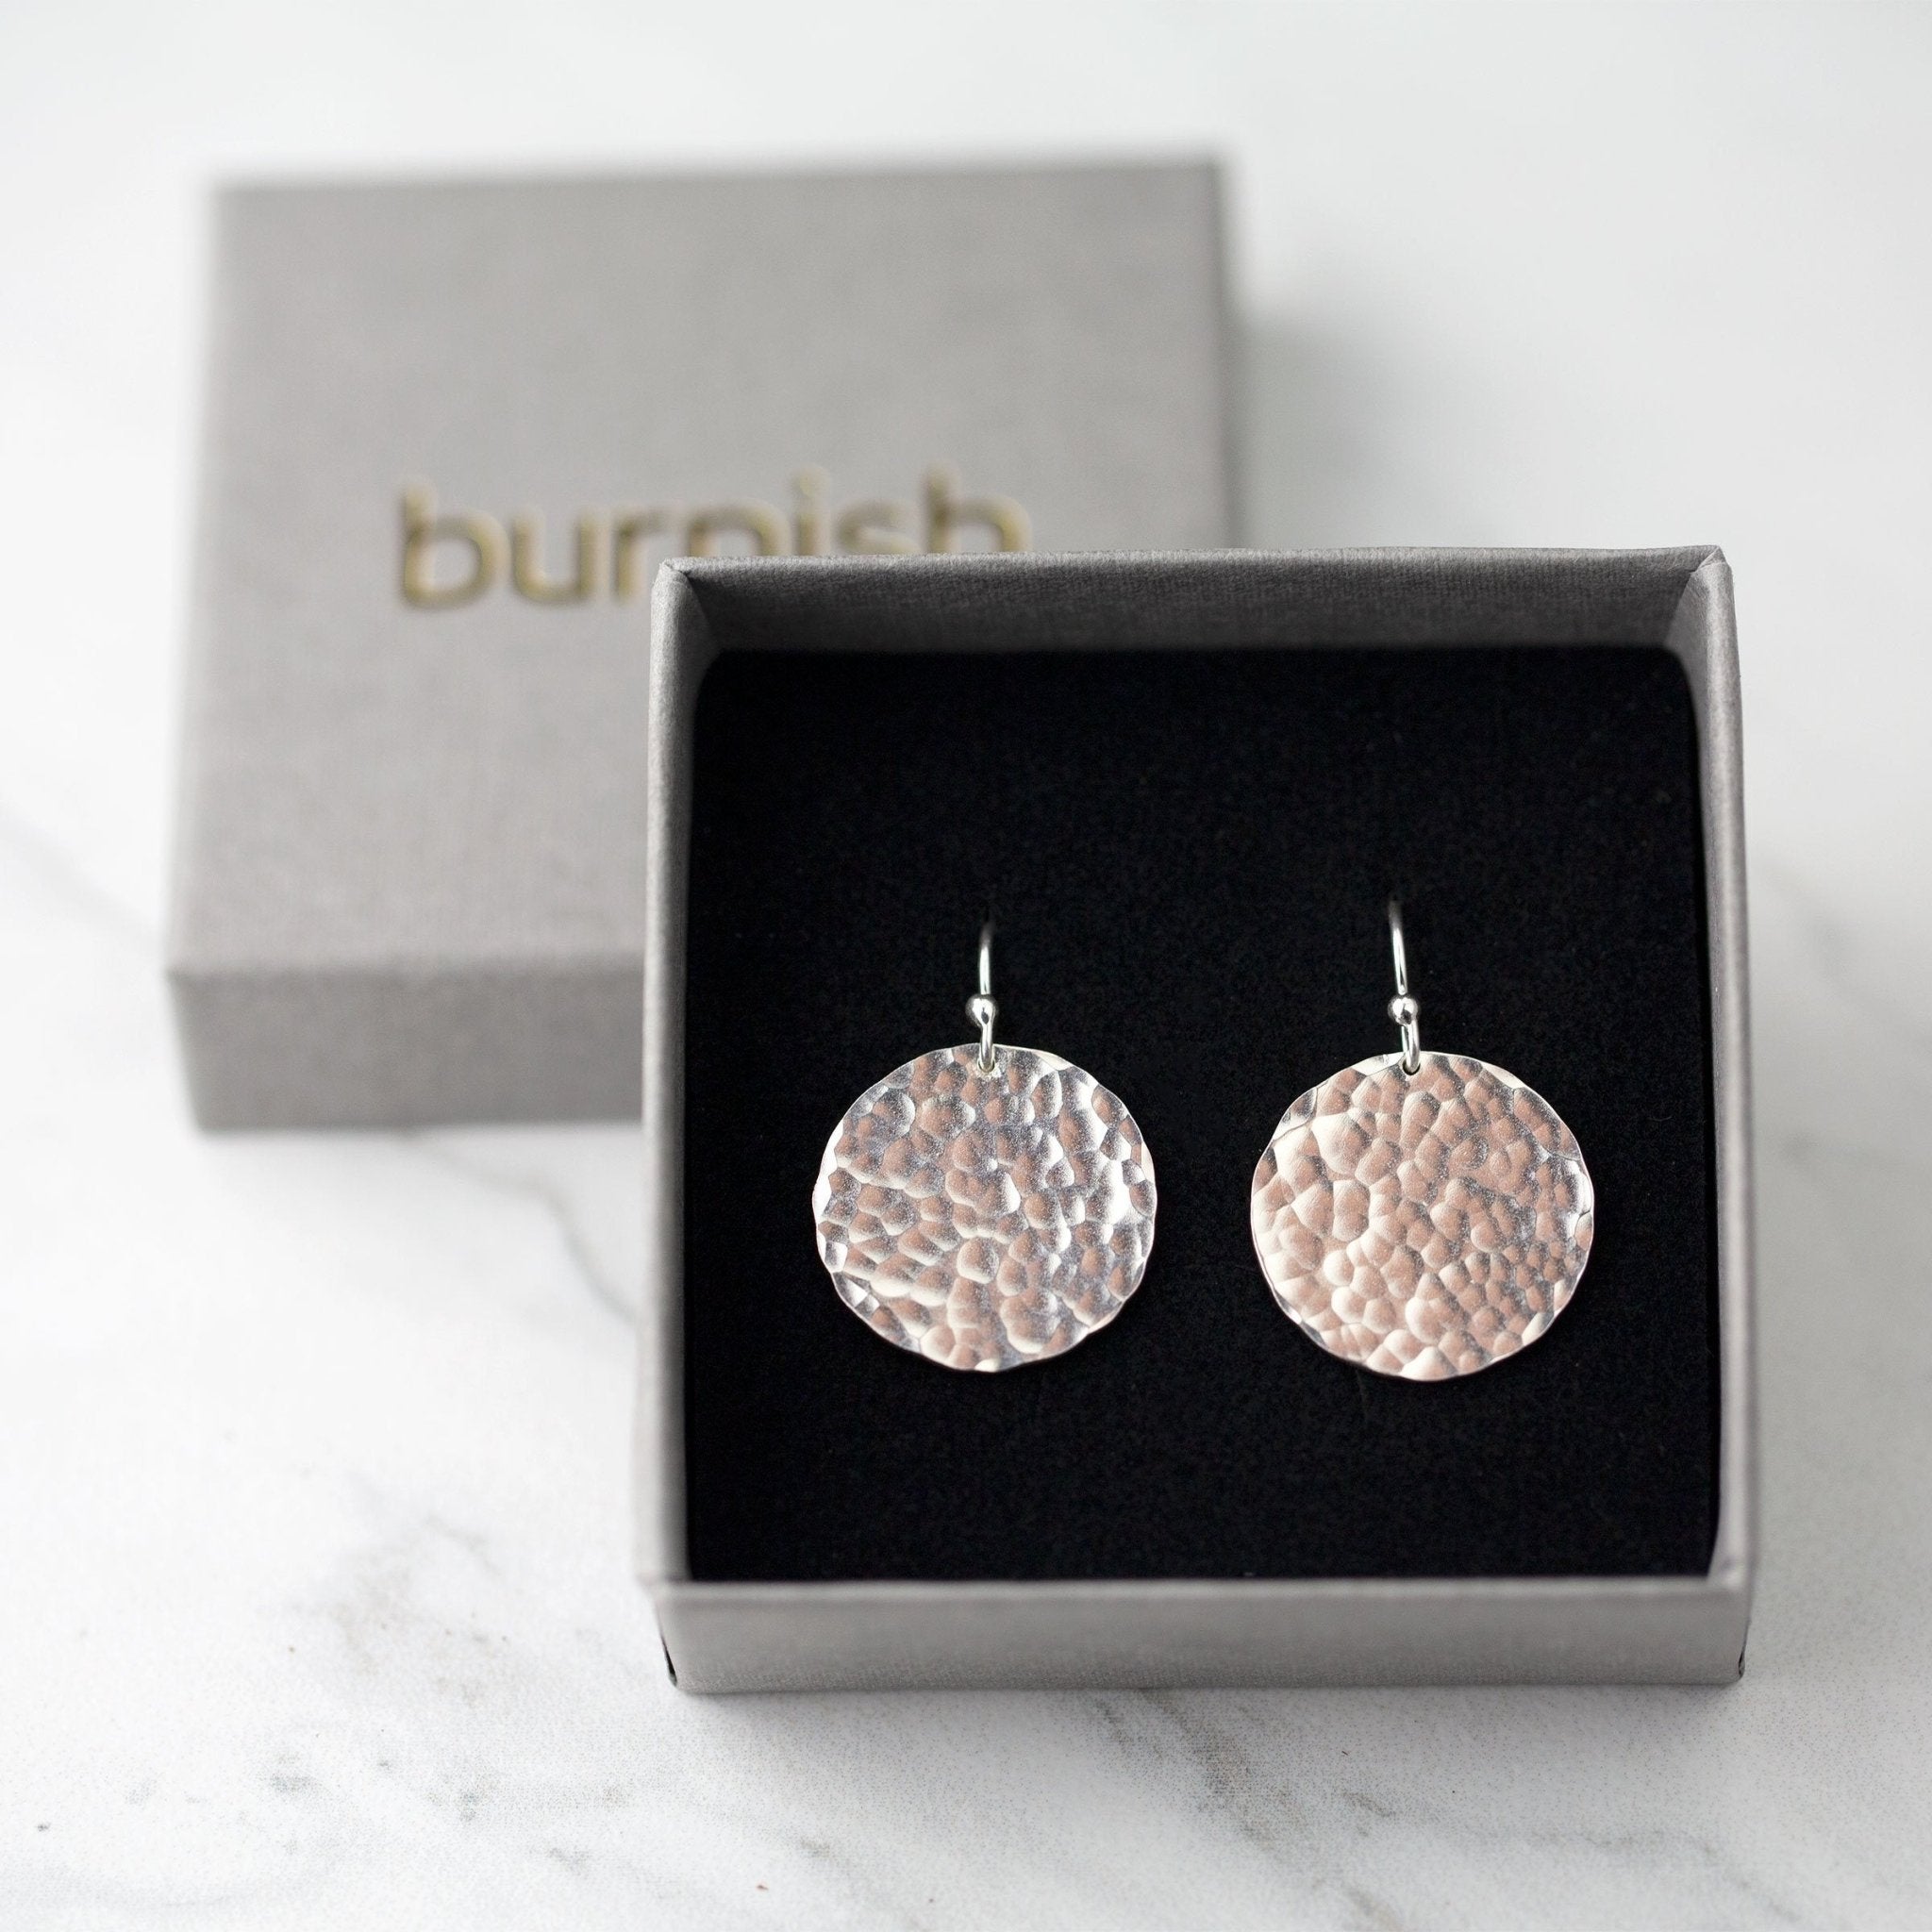 Large Hammered Silver Disc Earrings - Handmade Jewelry by Burnish